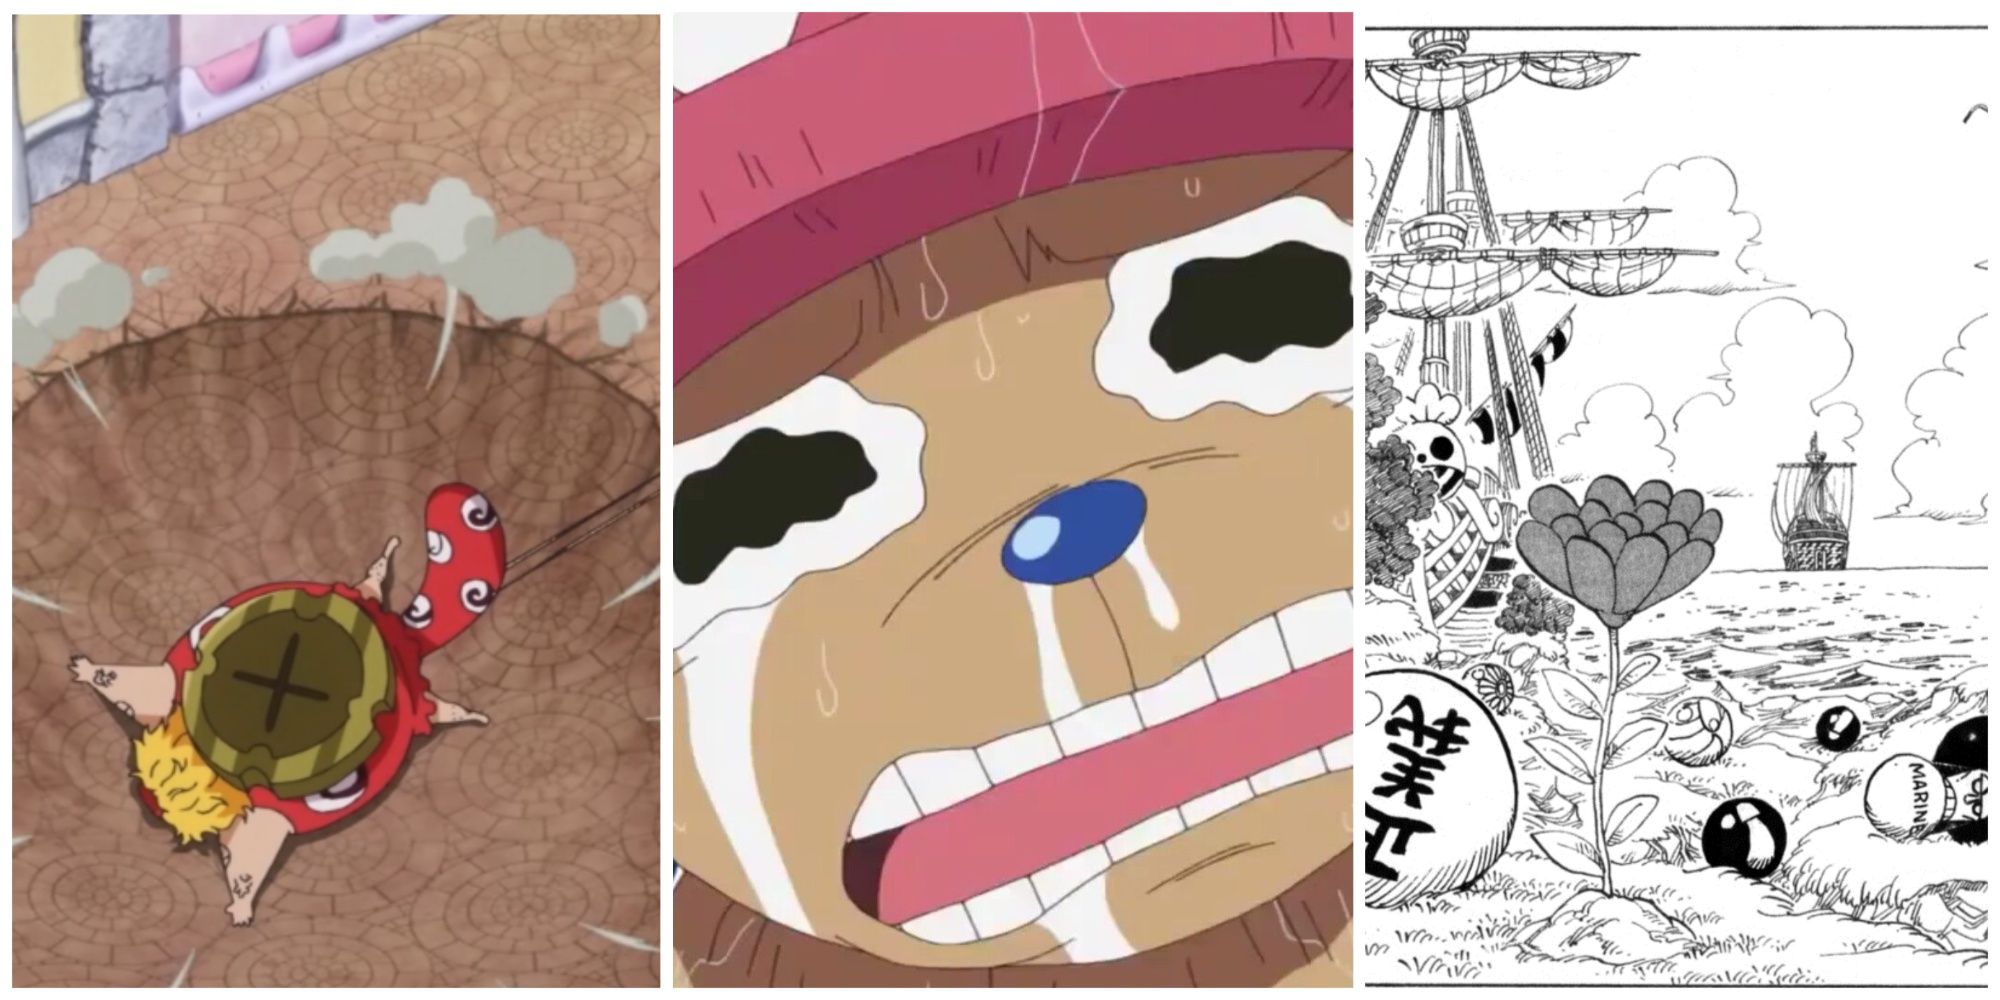 Machvise falling, Chopper crying, Berry disassembled in the One Piece manga